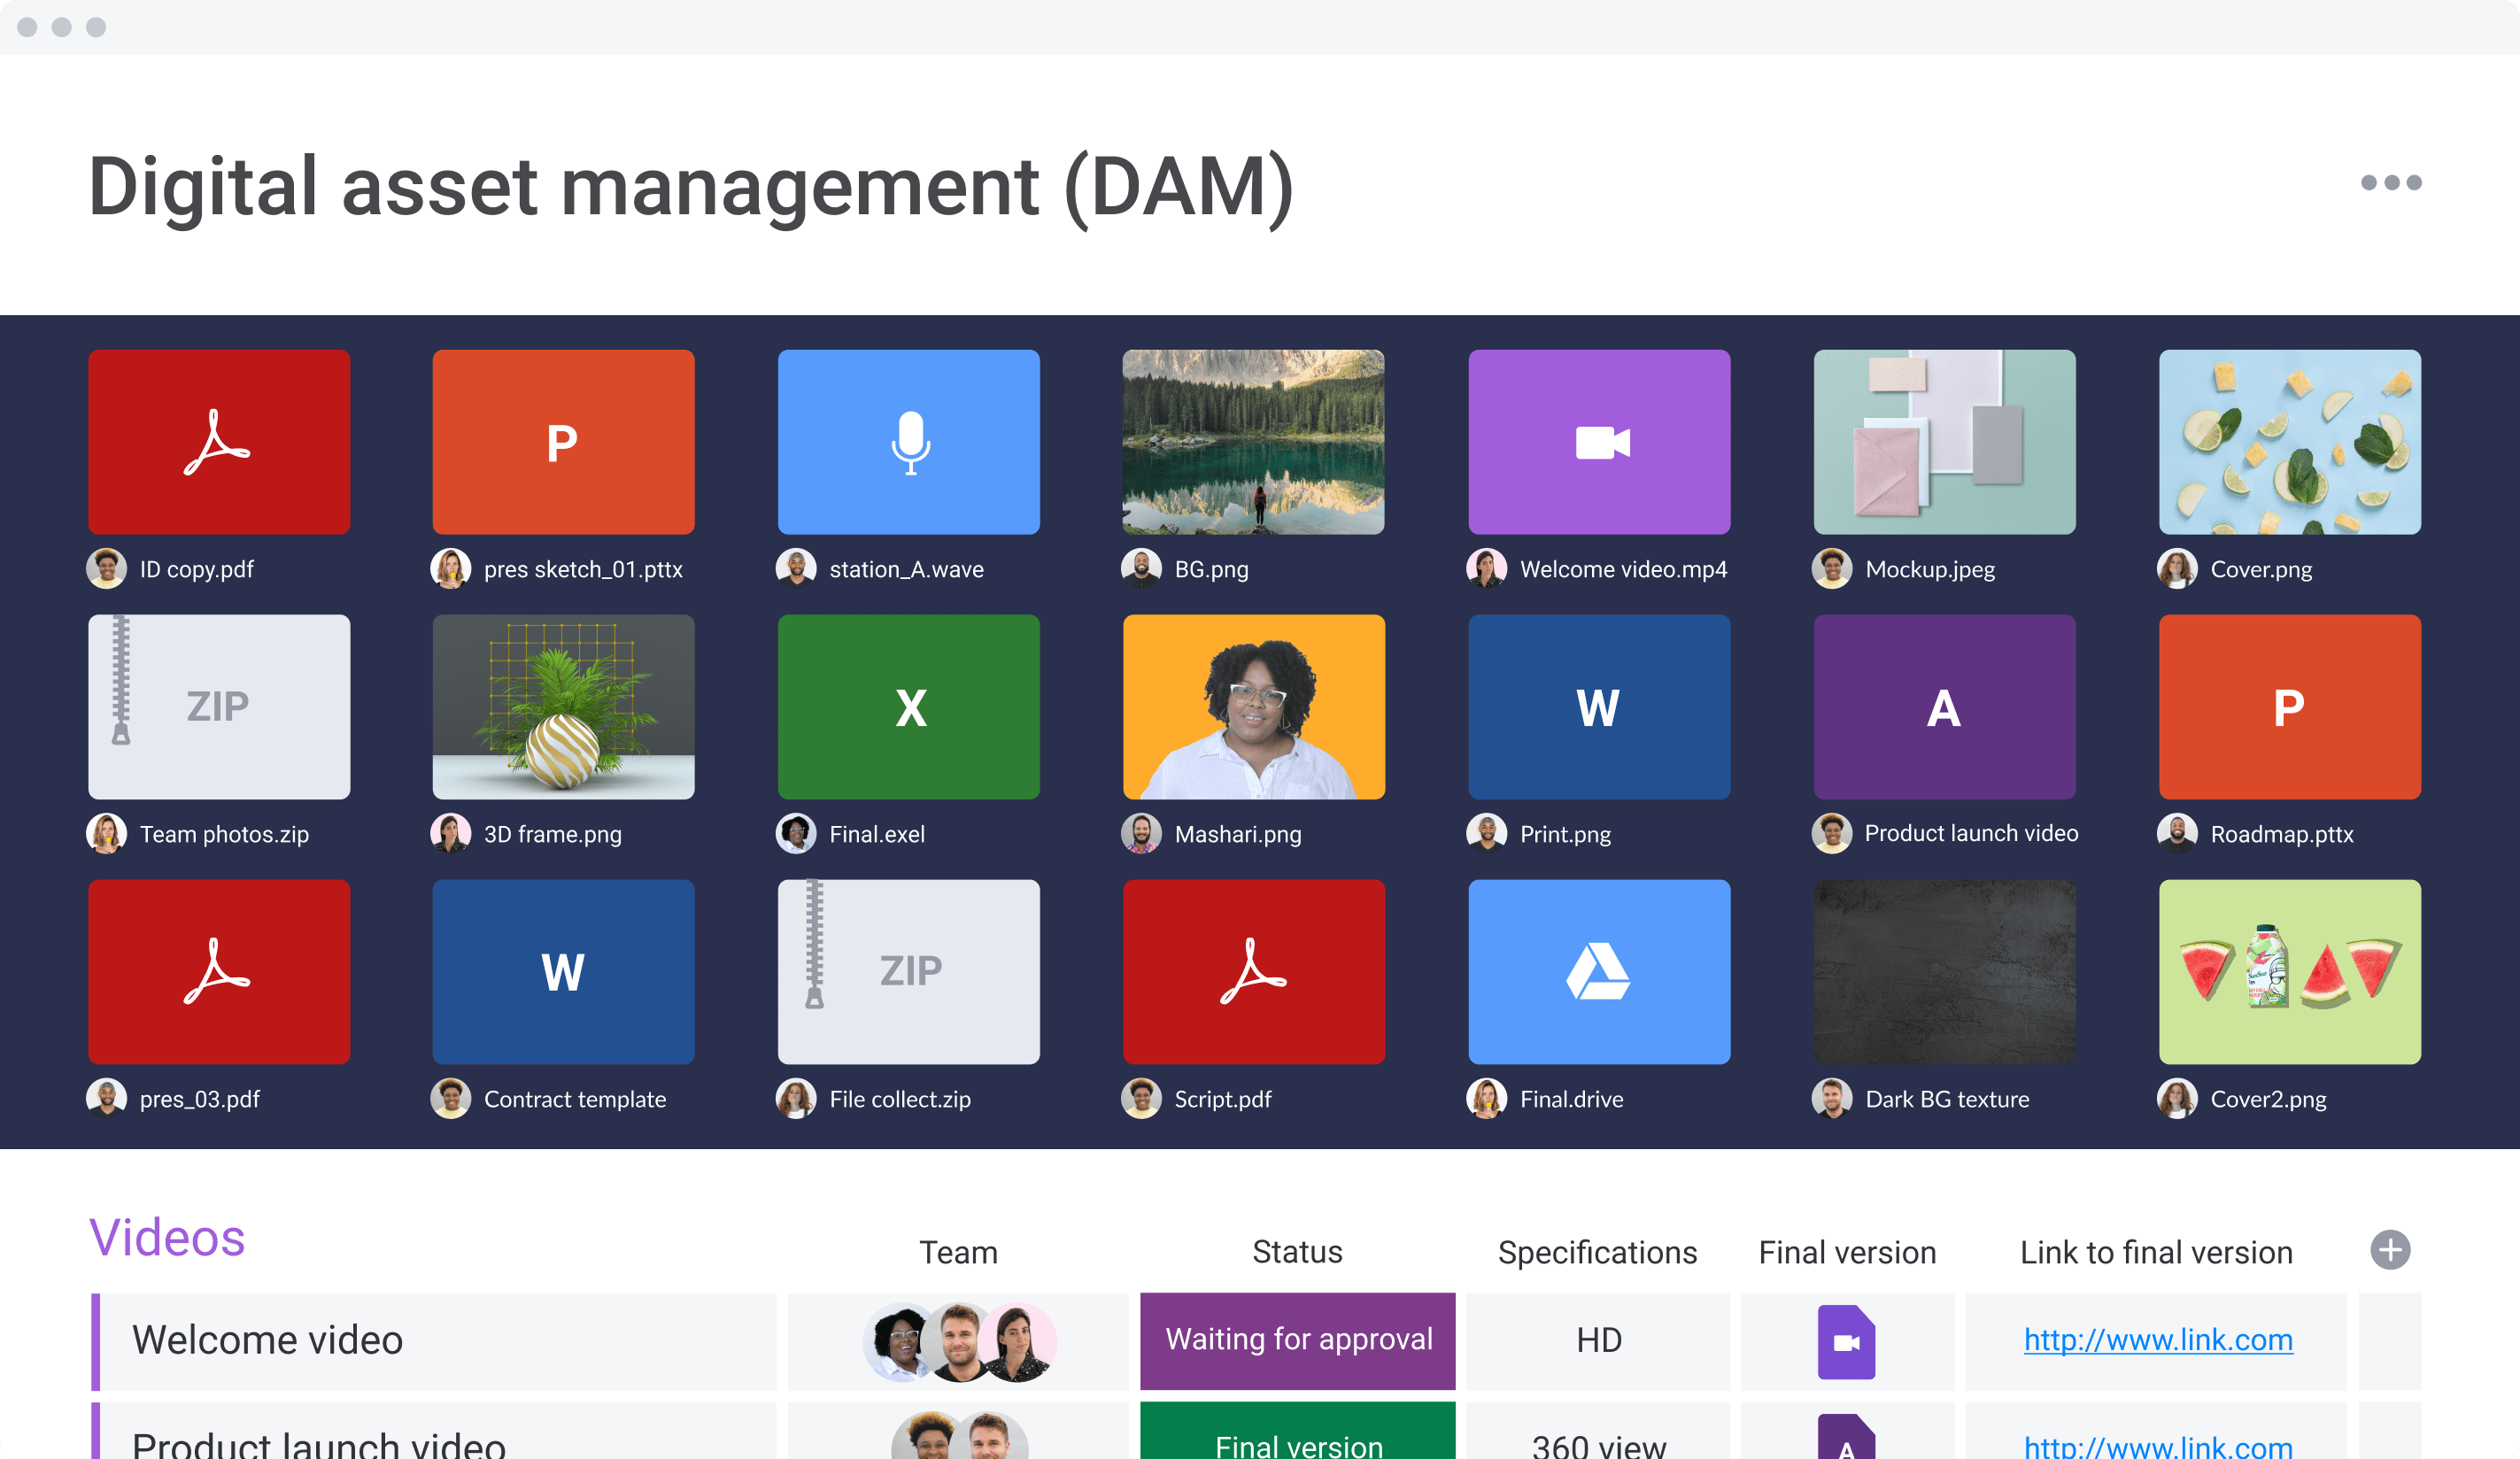 Manage all your files in one place